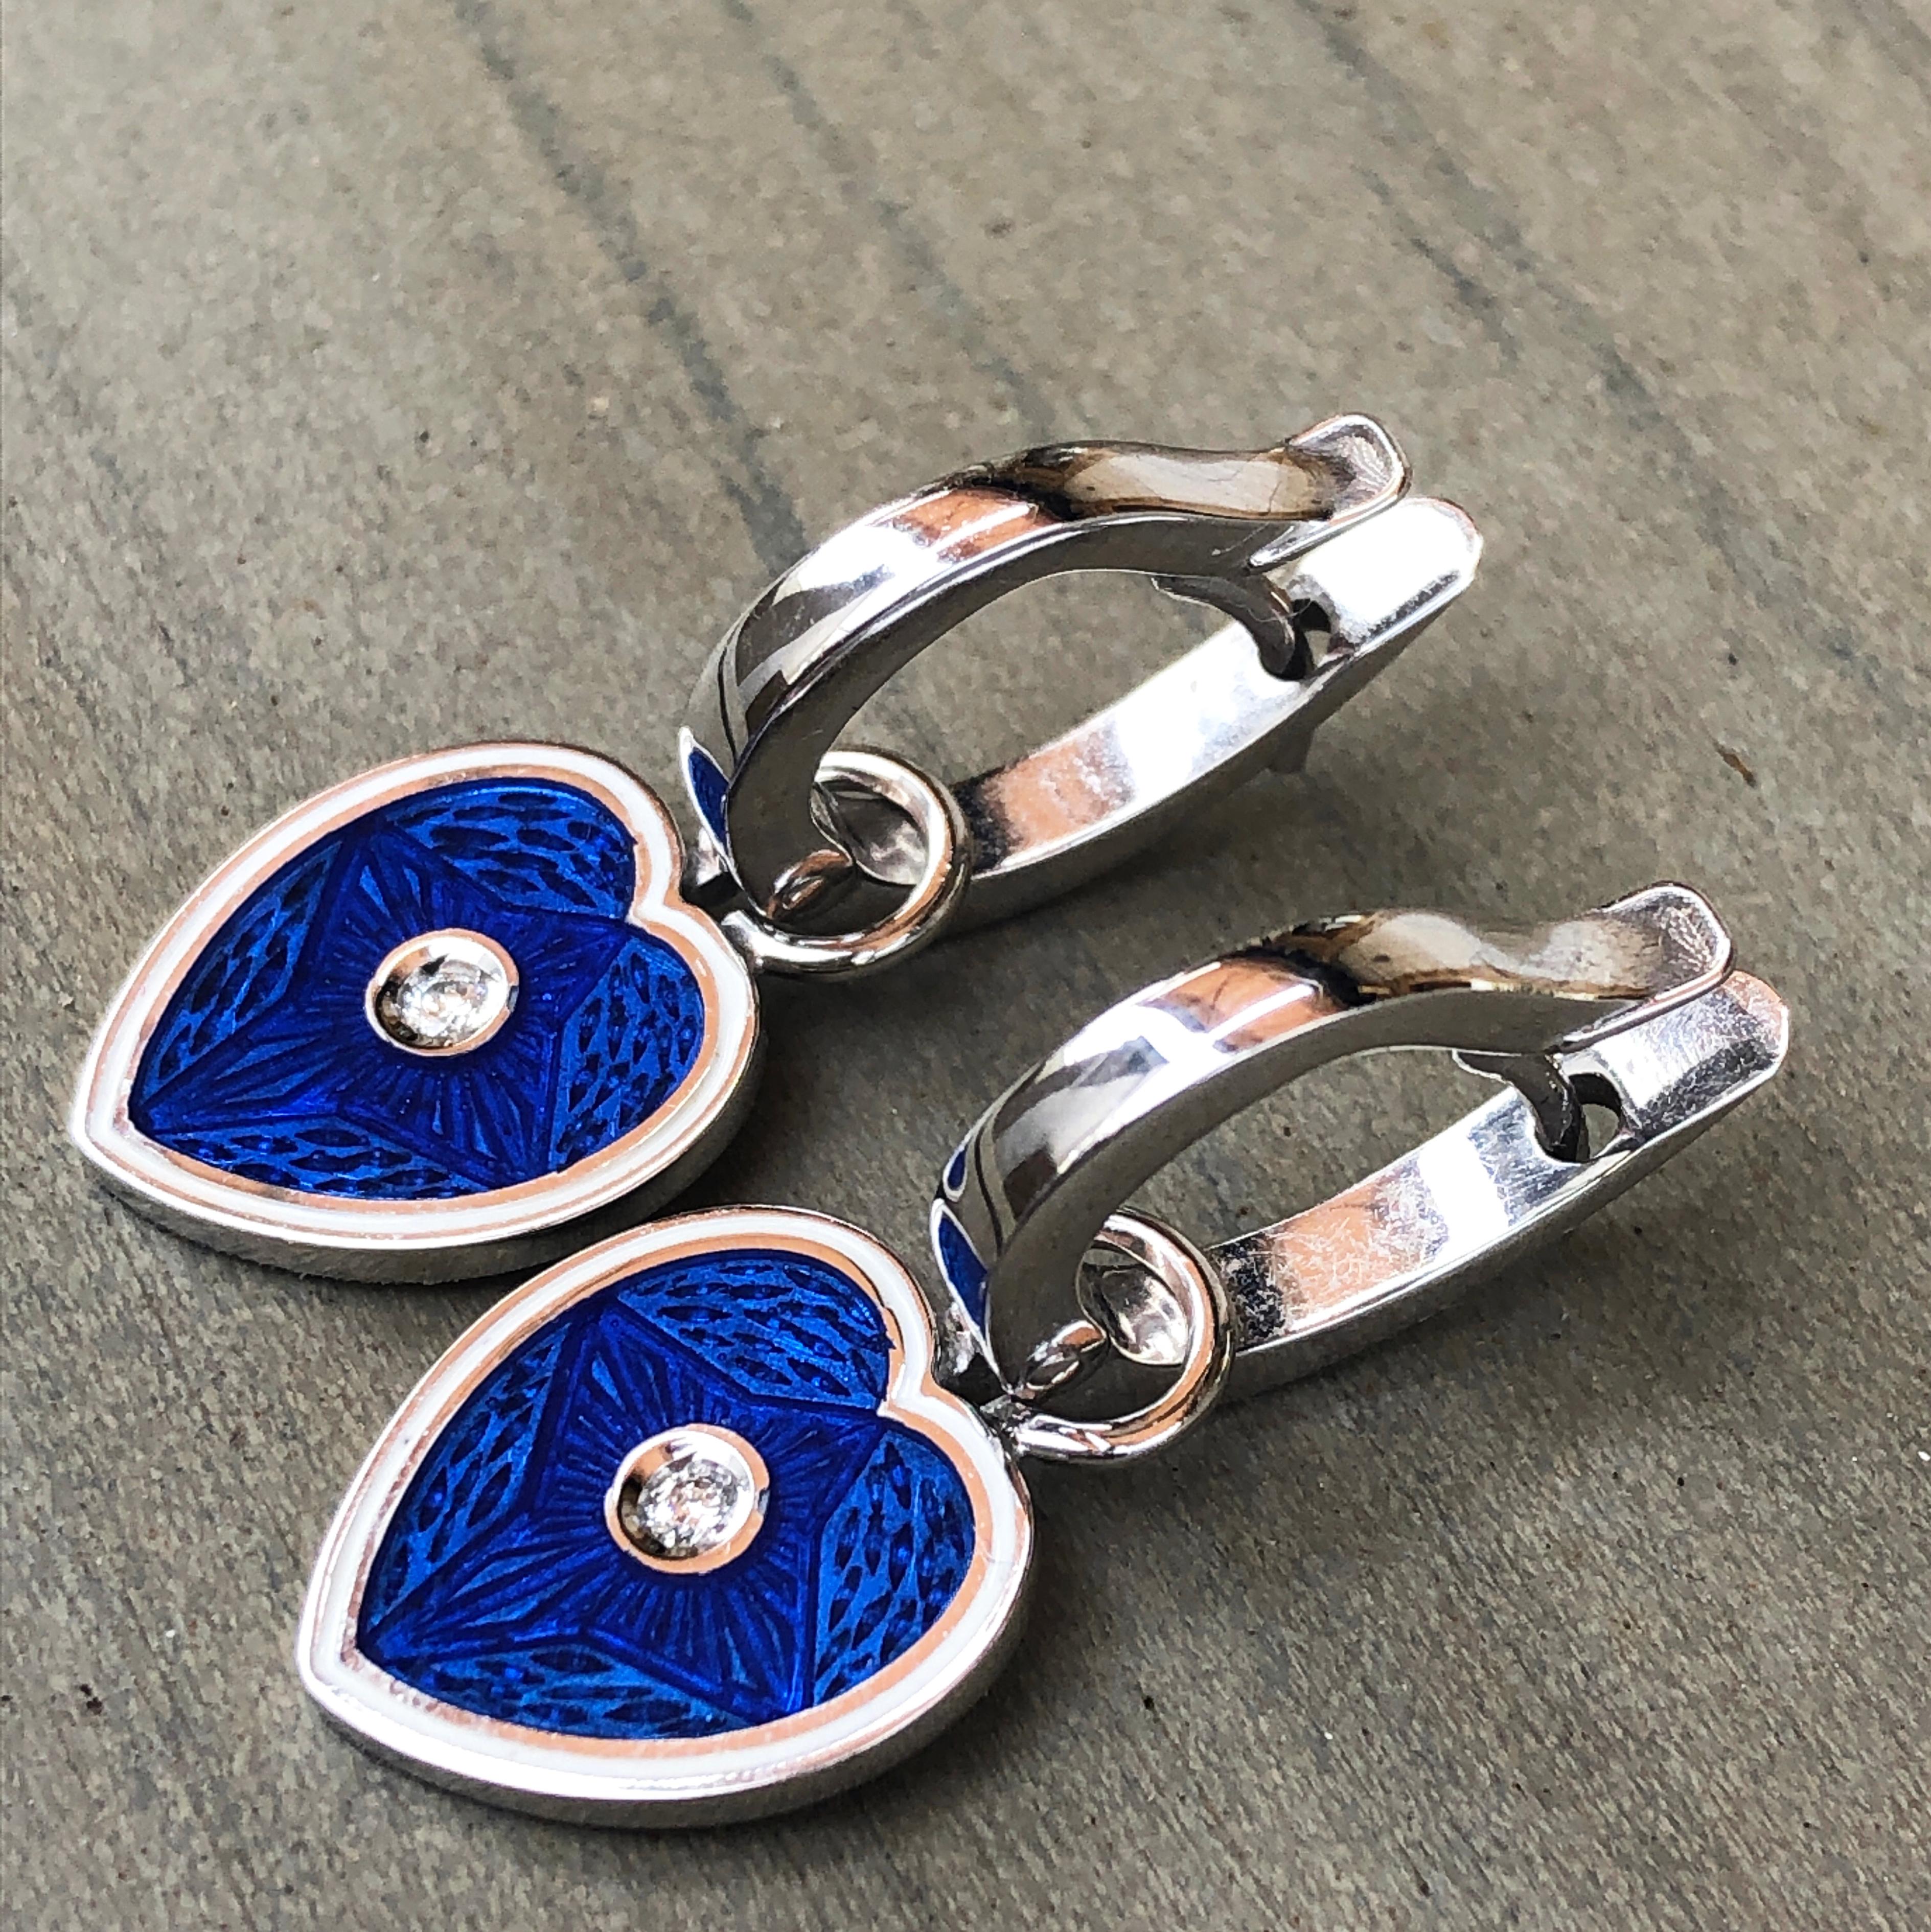 Chic yet timeless 0.08 Carat White Diamond in a White Edged Royal Blue Heart Shaped Removable Pendant in a White Gold Setting.
This brilliant setting allows to wear these lovely earrings both ways.

In our smart Tobacco Suede Leather Case.
Total